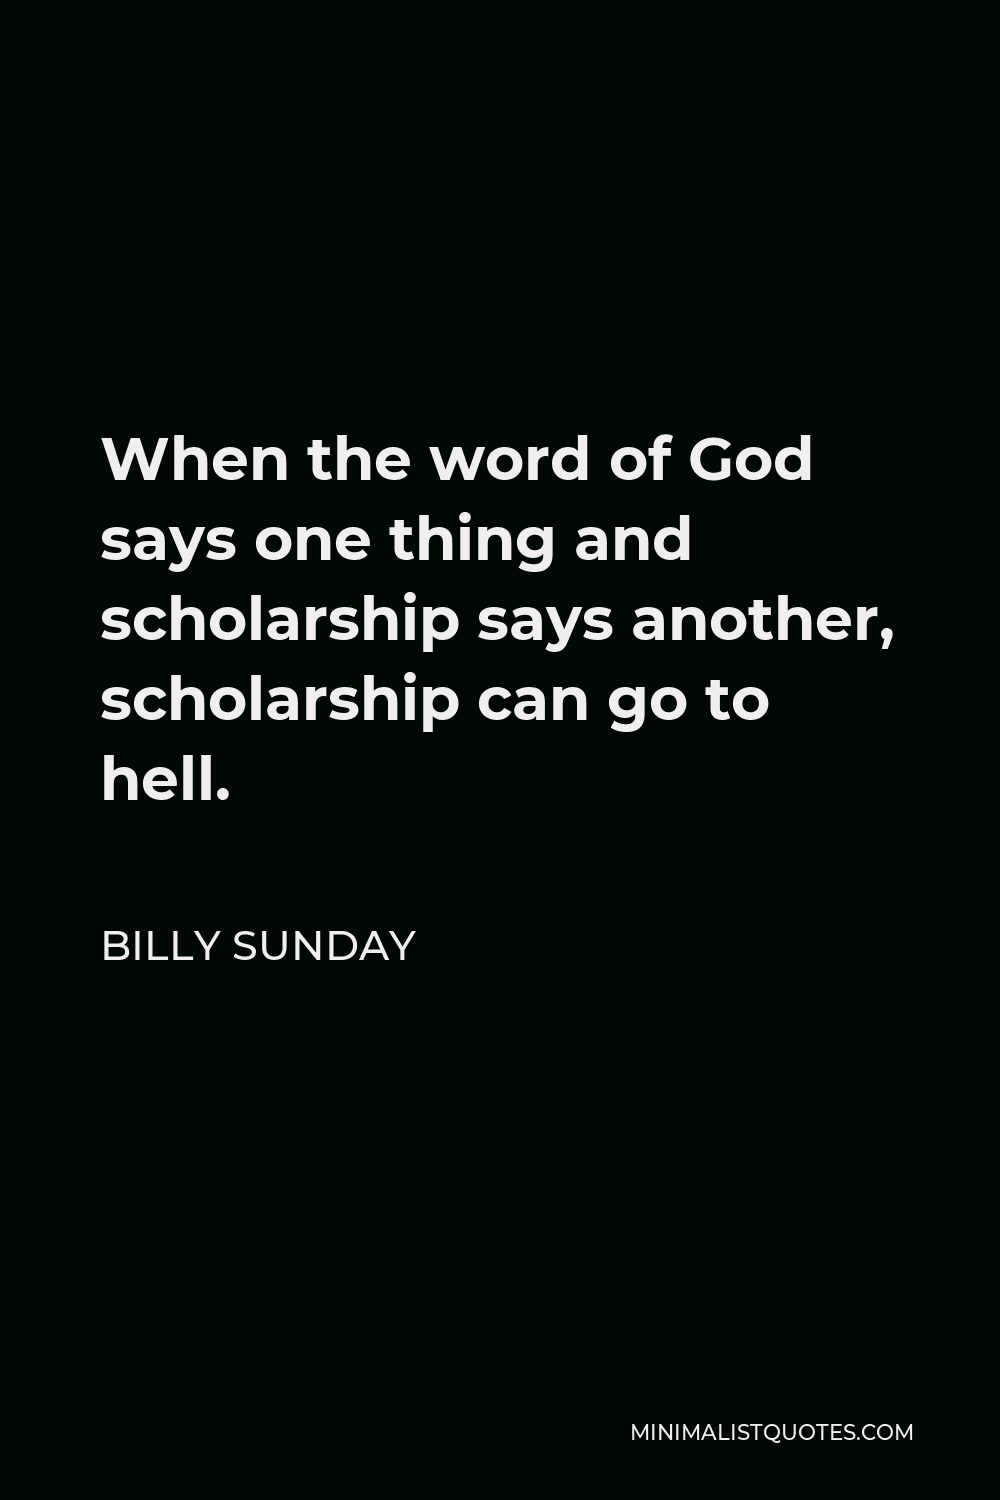 Billy Sunday Quote - When the word of God says one thing and scholarship says another, scholarship can go to hell.